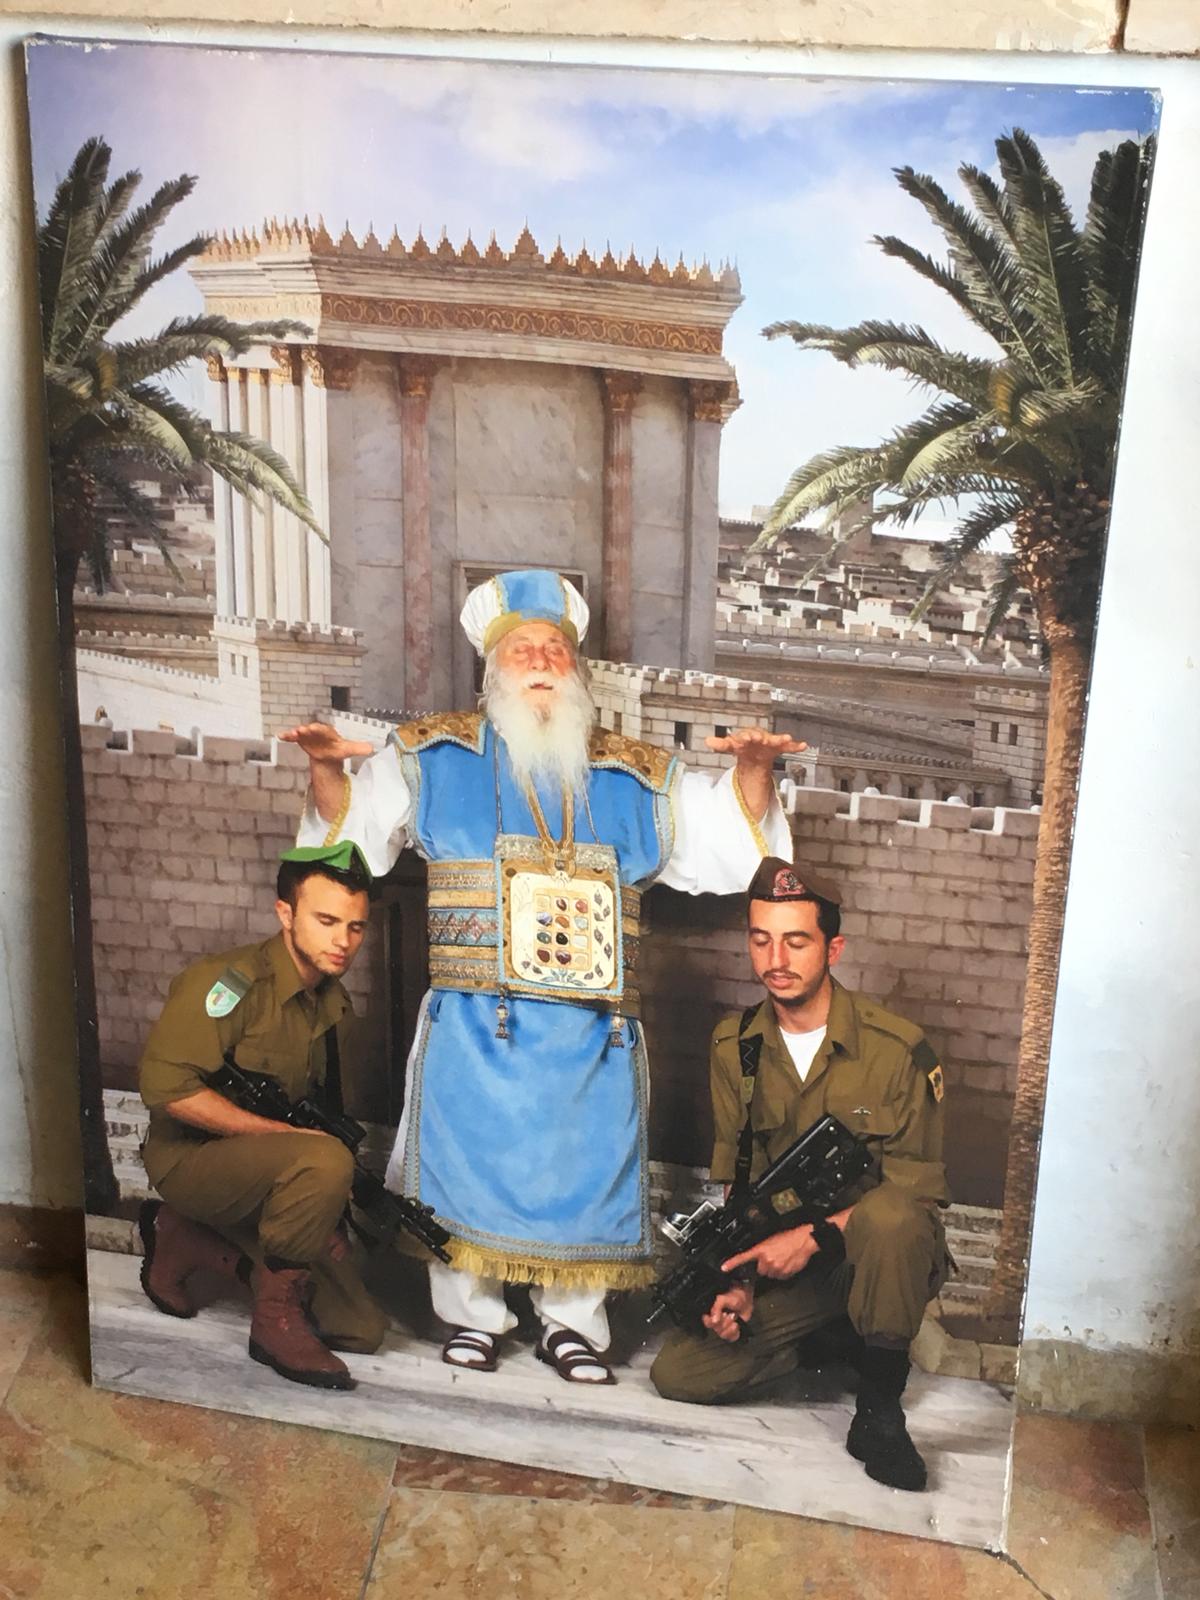 A poster of a High Priest of Israel with his hands hovering over two soldiers.